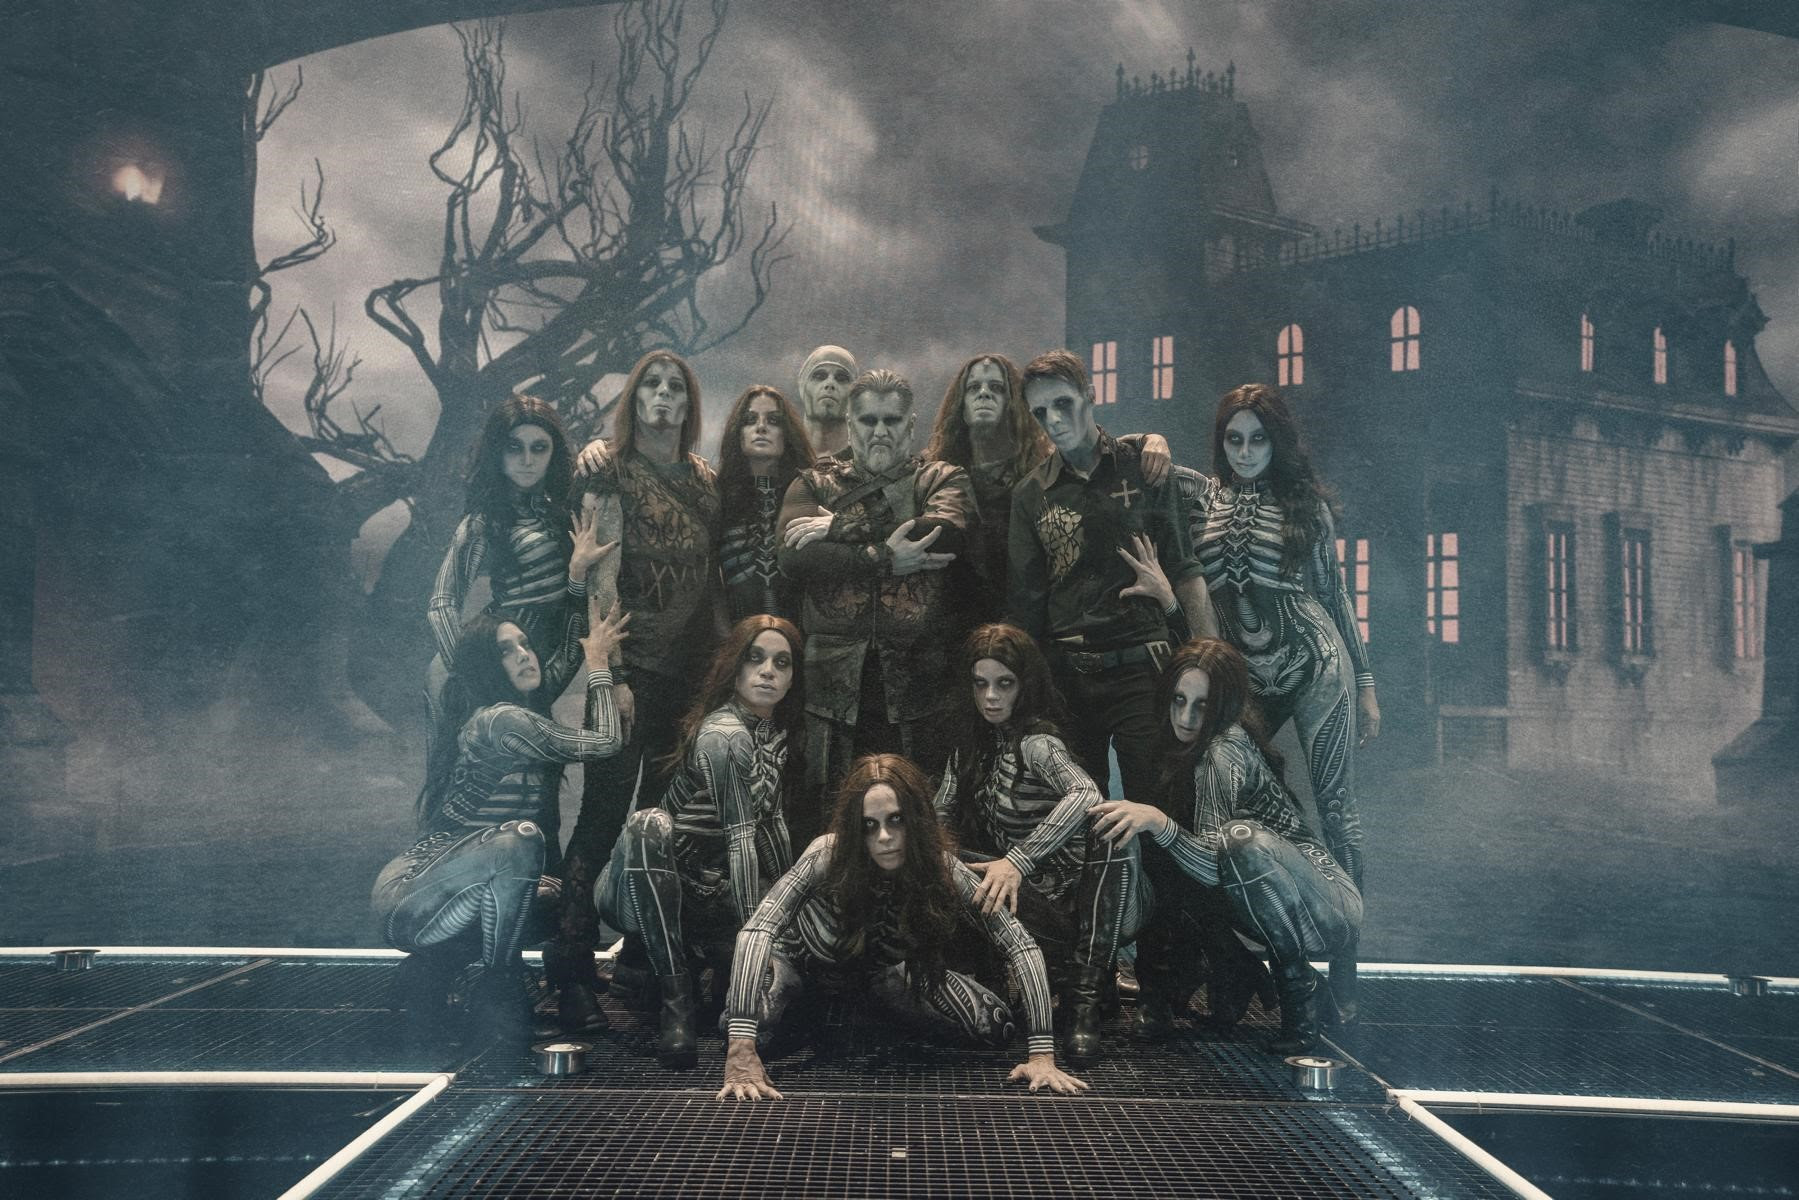 Powerwolf - The song refers to the Irish „FAOLADH“, a